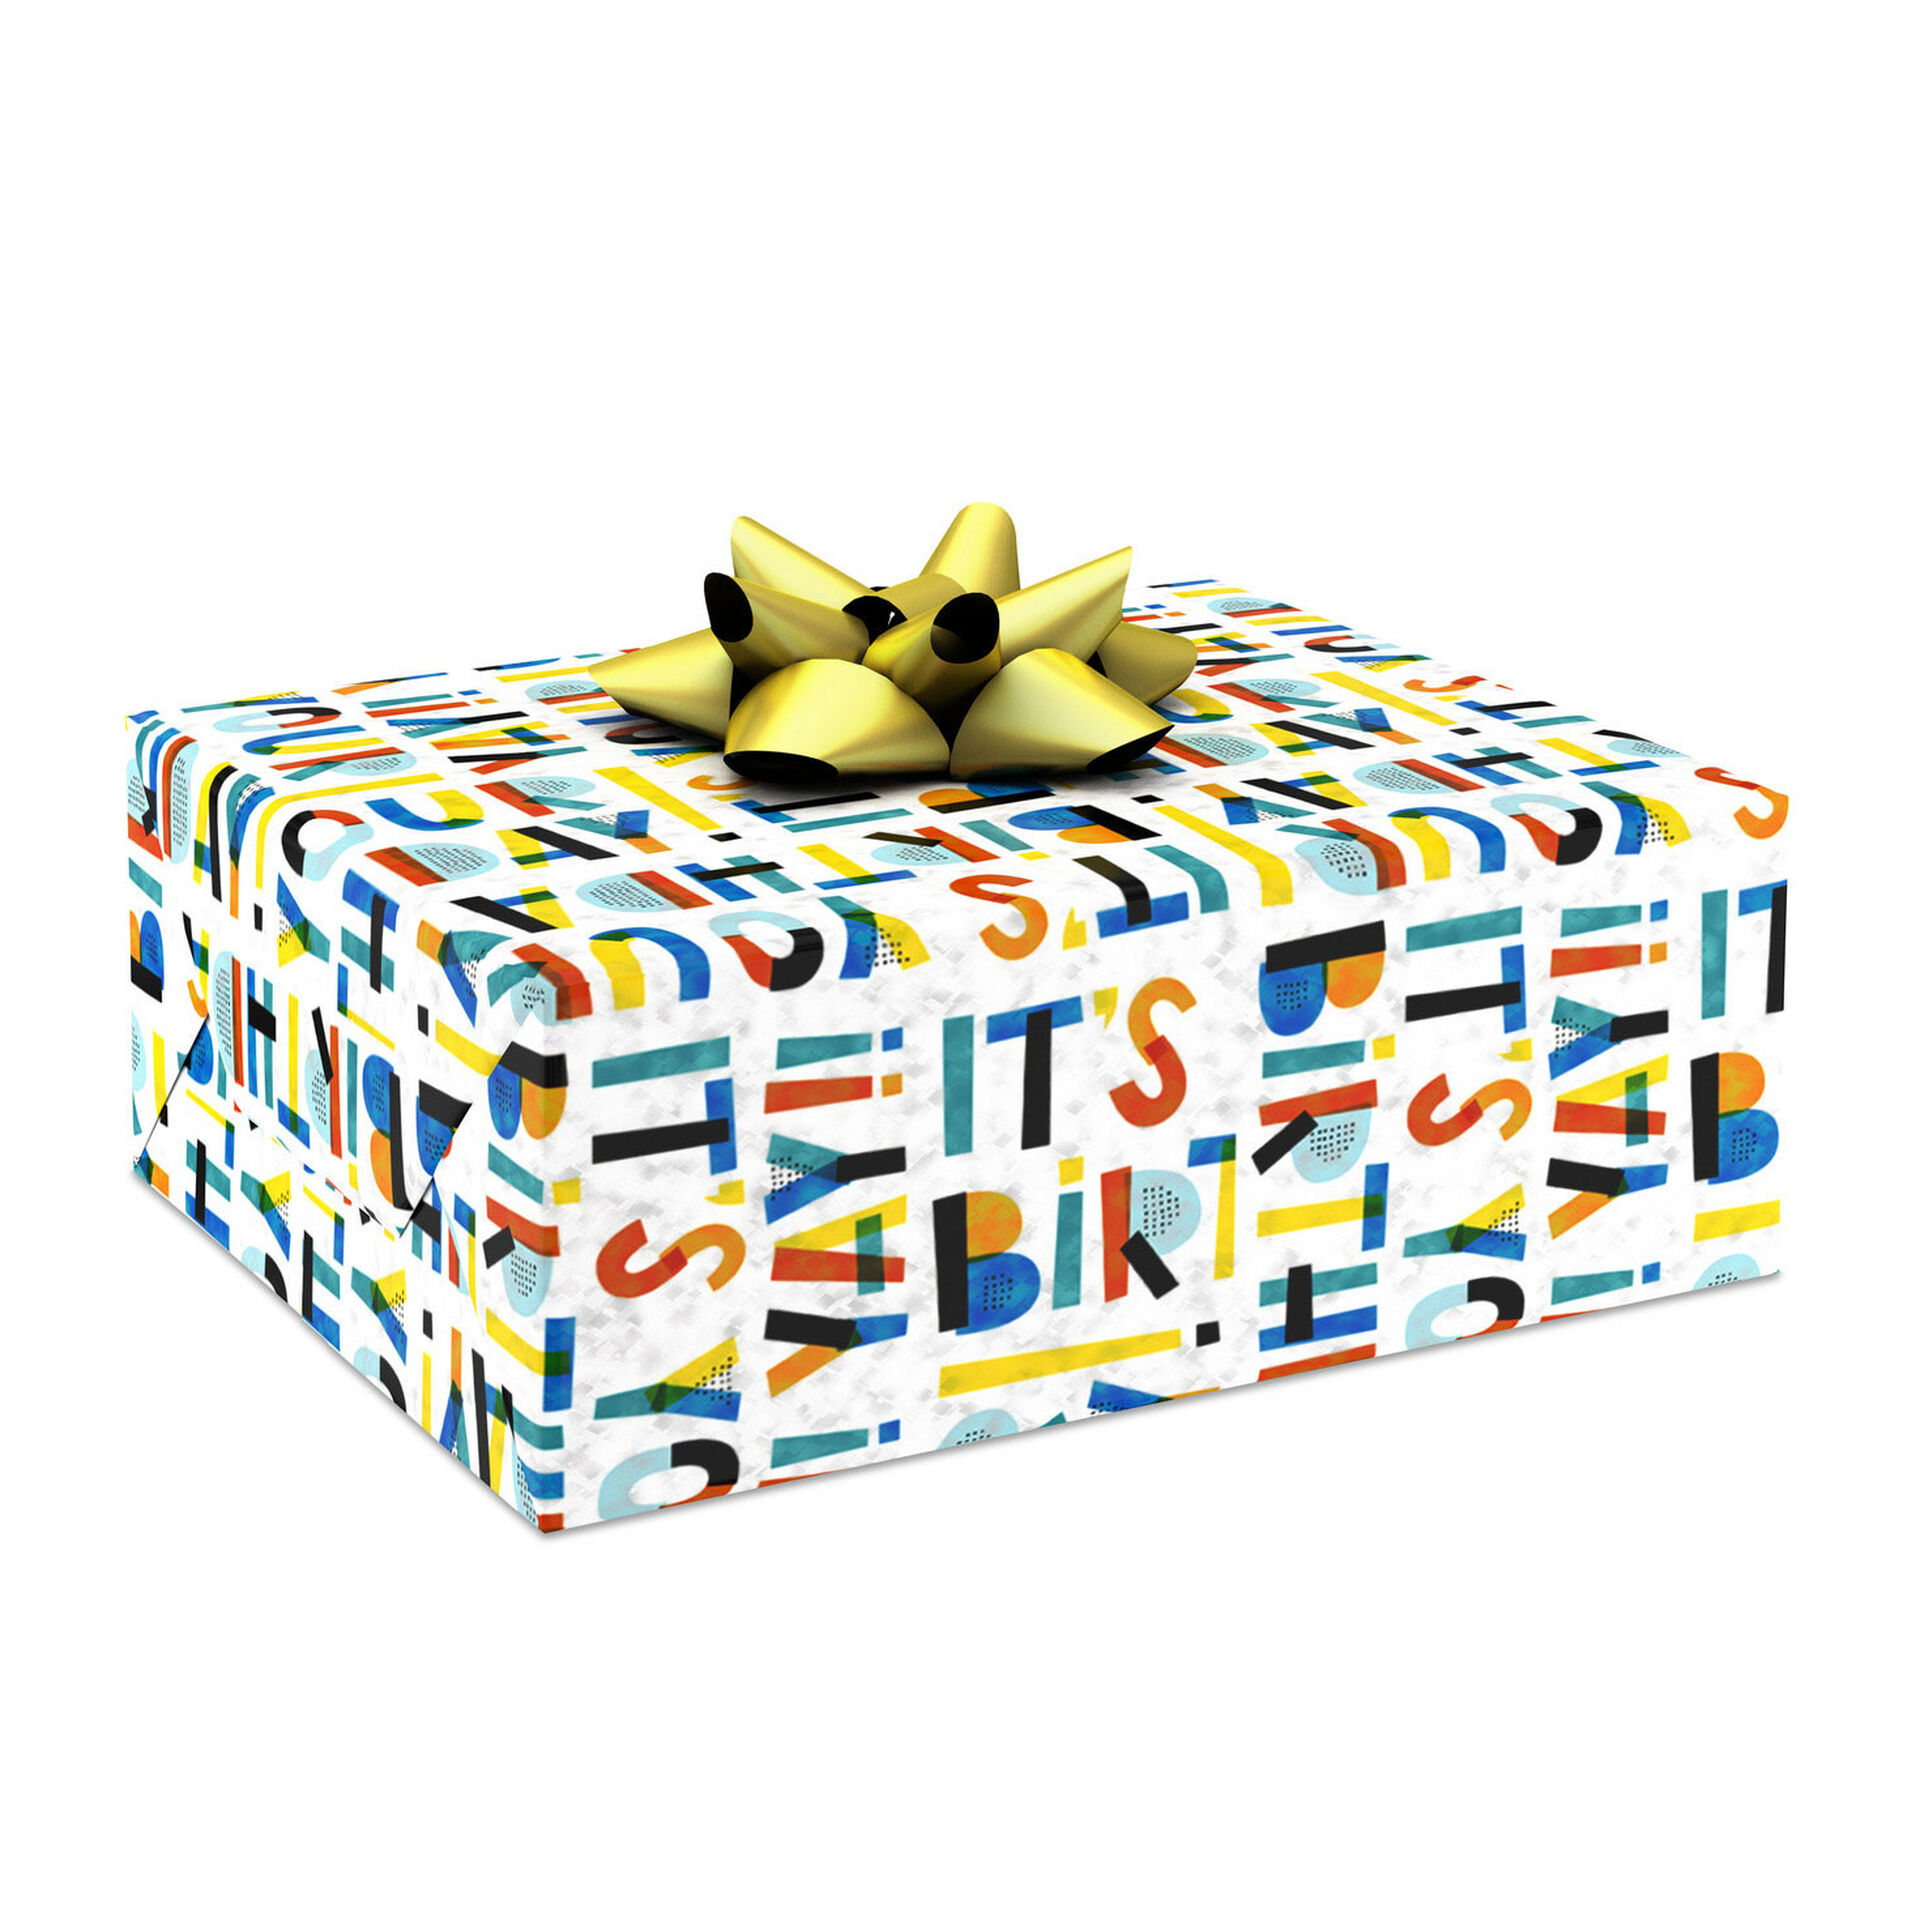 yay-it-s-your-birthday-wrapping-paper-17-5-sq-ft-wrapping-paper